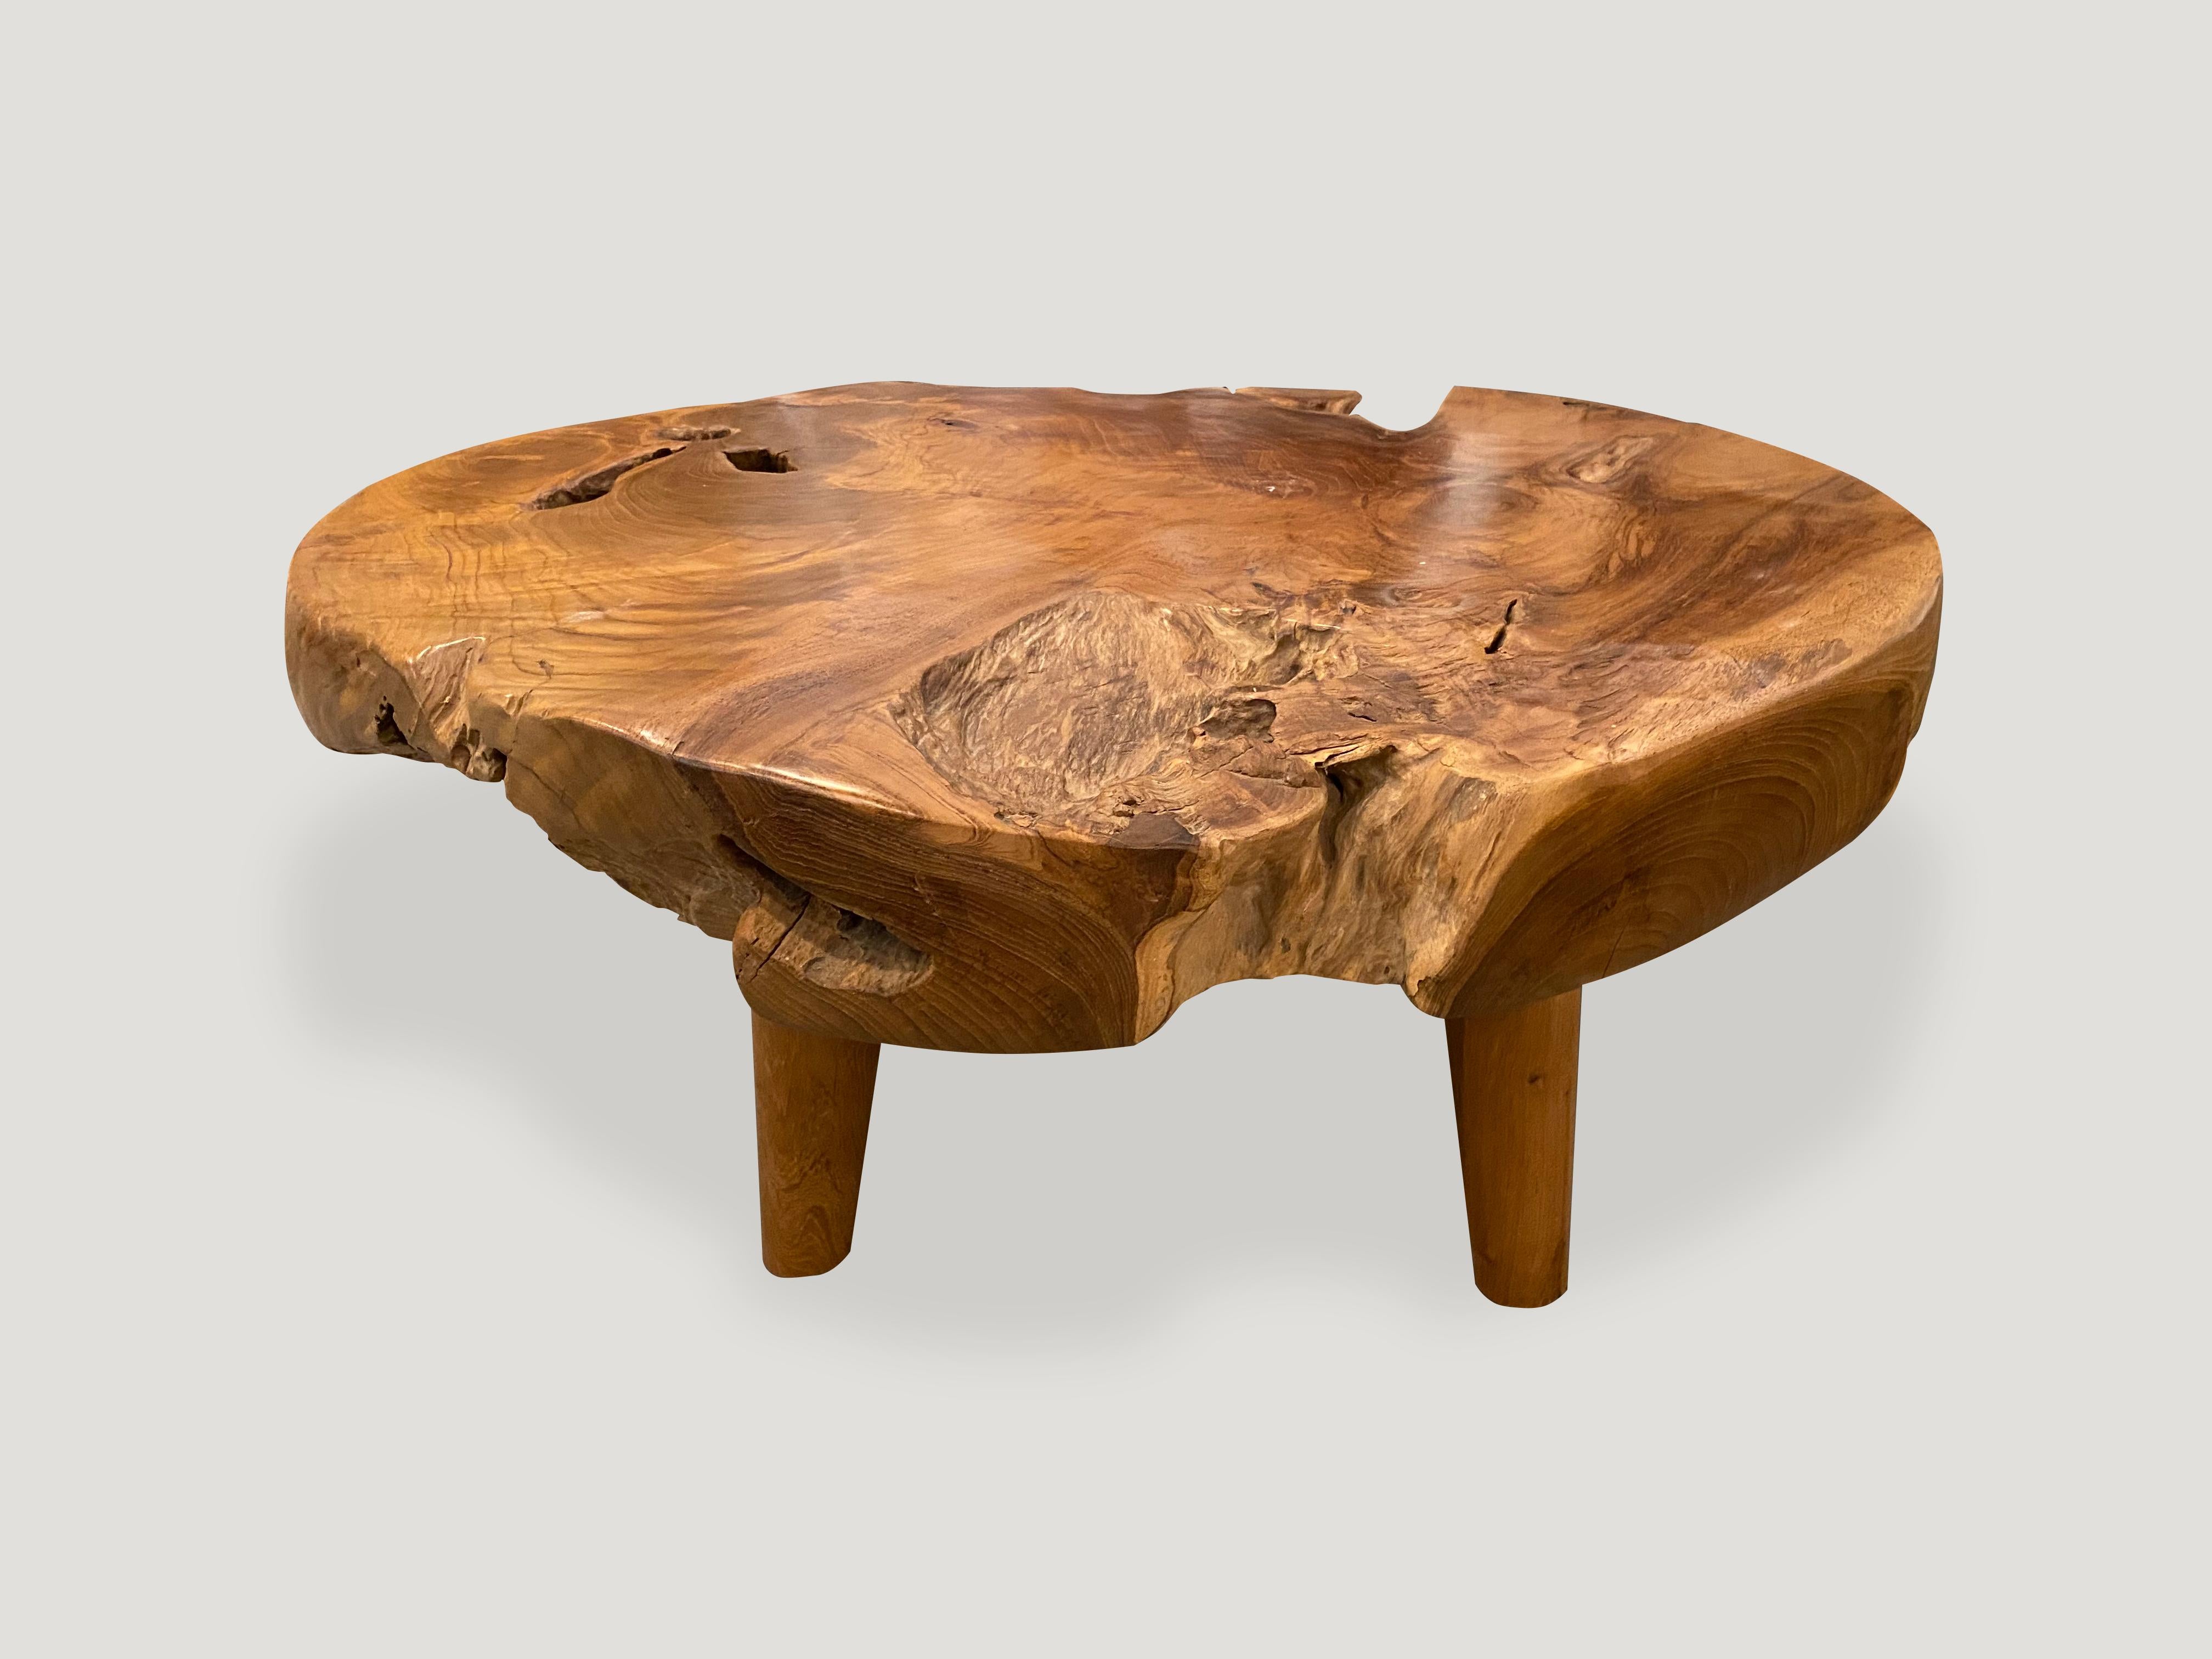 Impressive four inch thick natural teak wood coffee table carved from a single log. Floating on midcentury style cone legs. Organic with a twist. We have a collection. The size and price reflect the one shown.

Own an Andrianna Shamaris